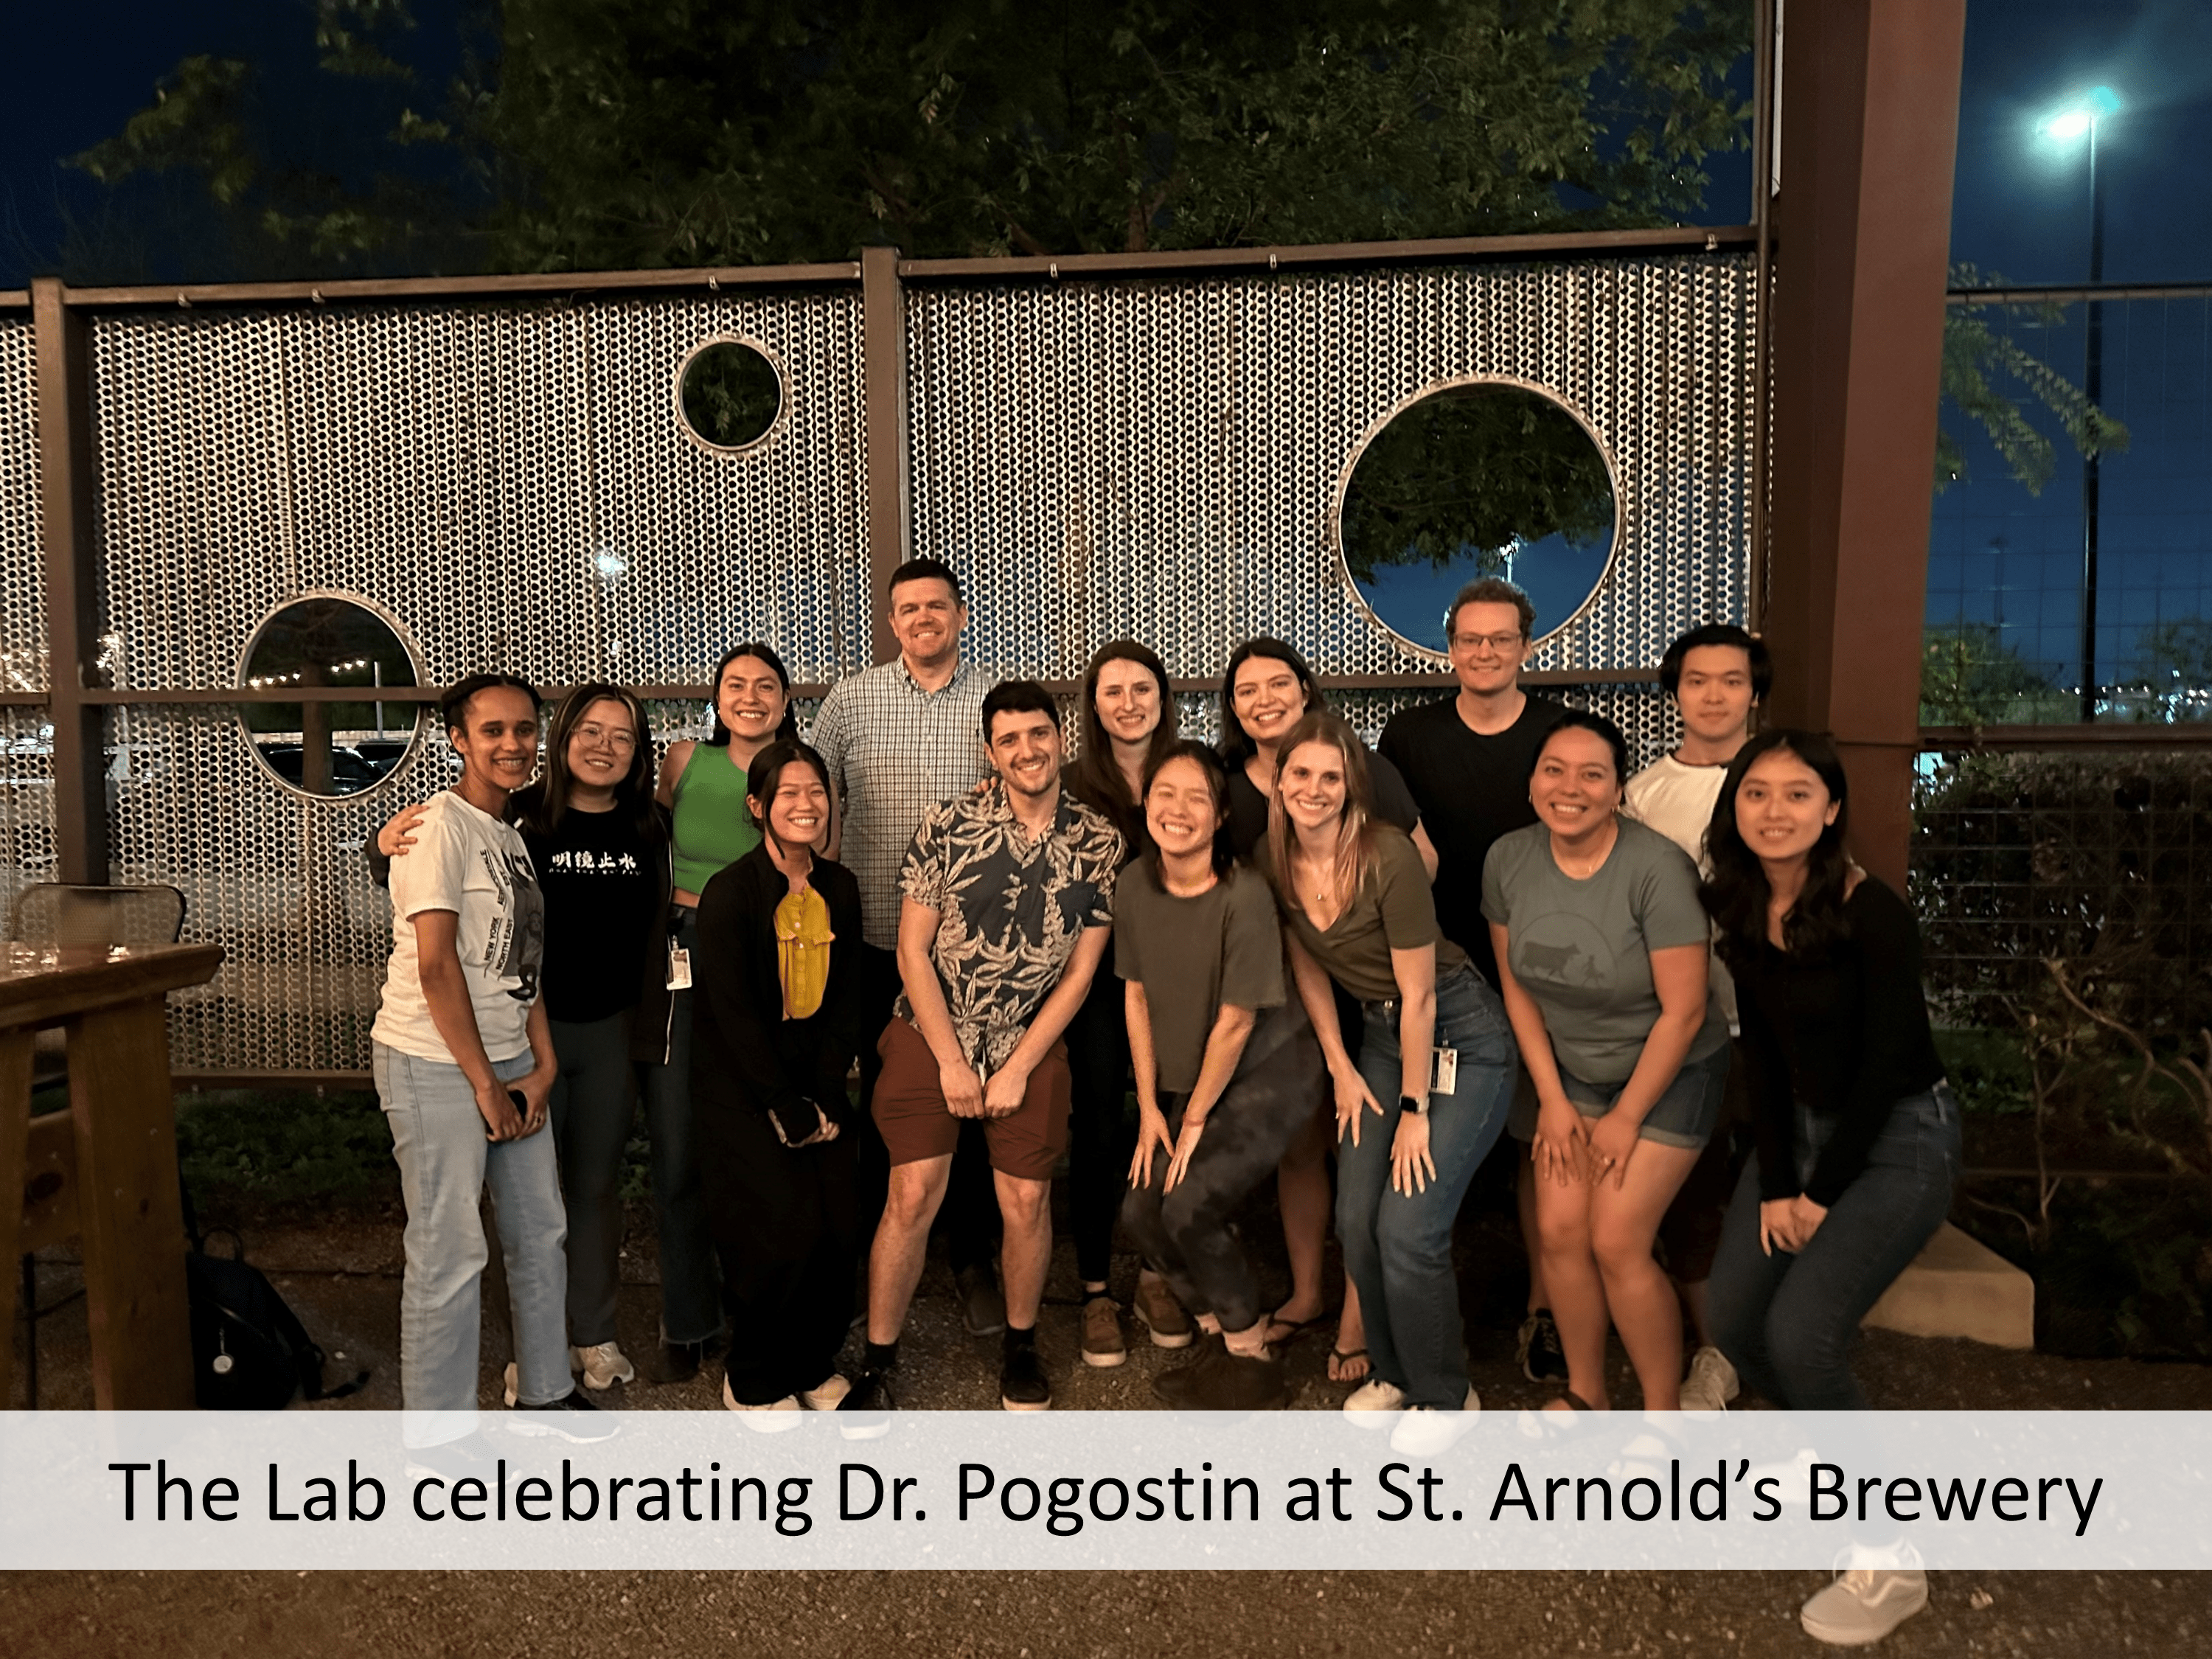 The Lab celebrating Dr. Pogostin at St. Arnold's Brewery